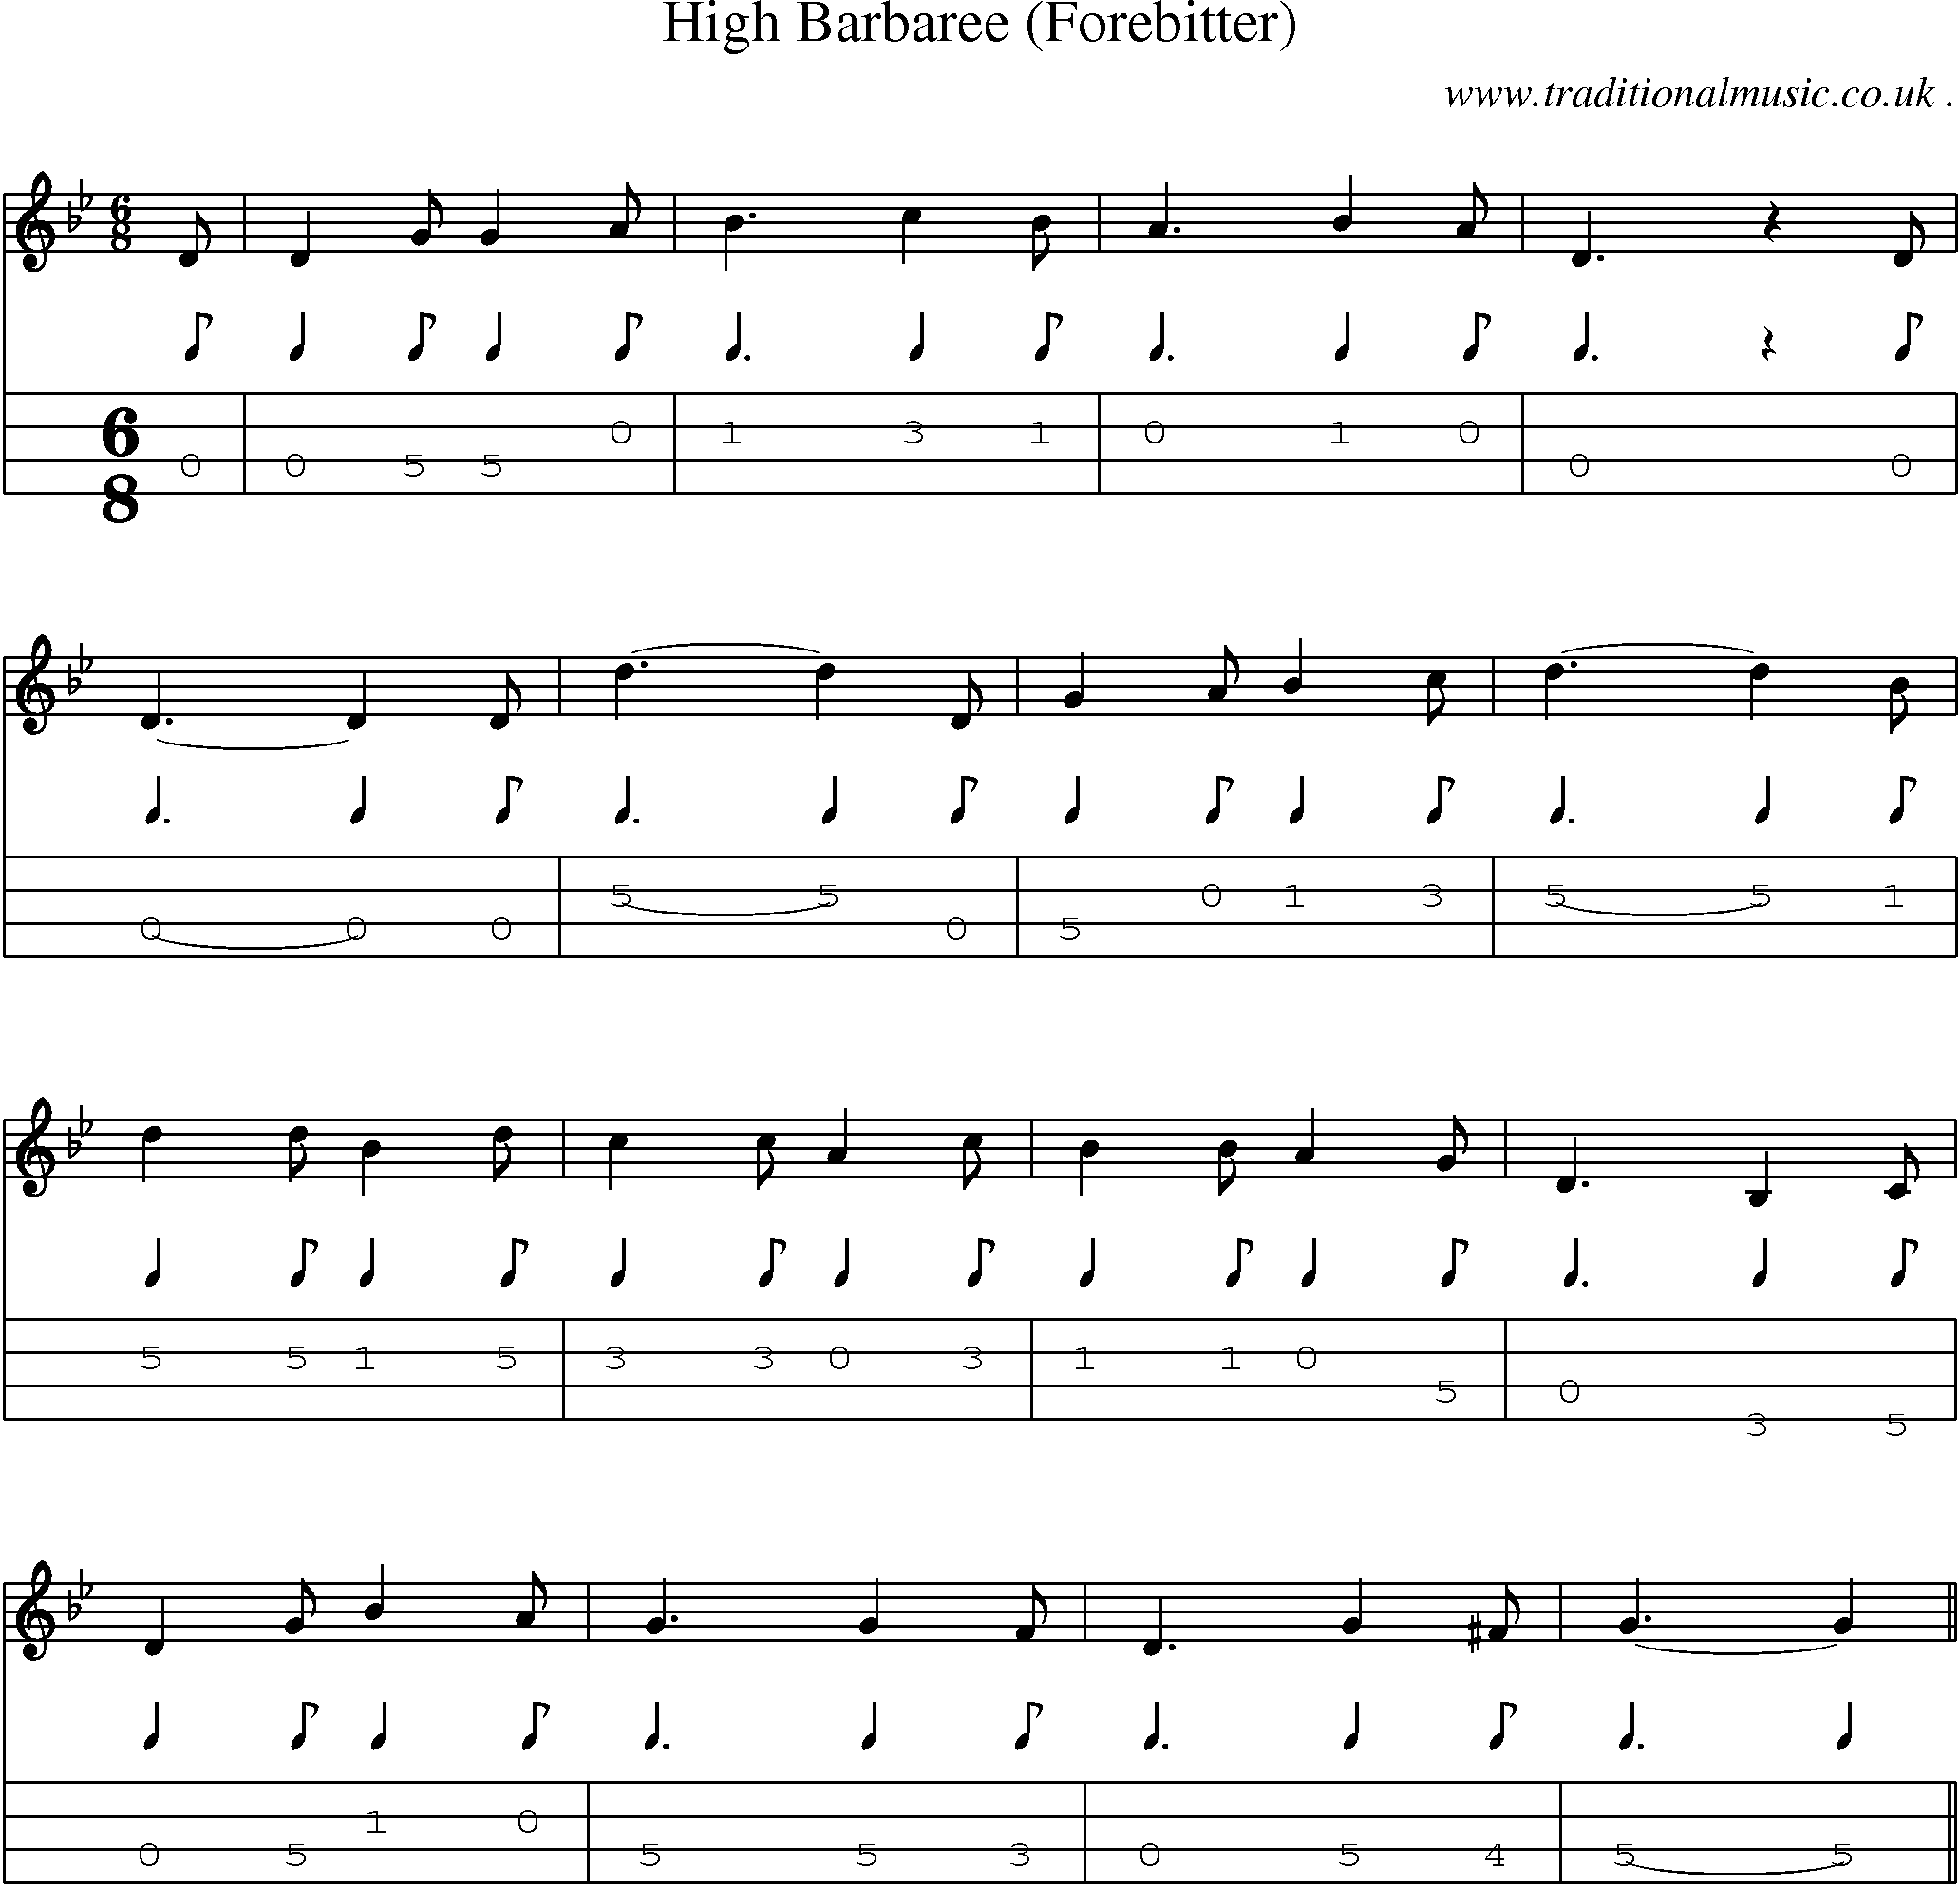 Sheet-Music and Mandolin Tabs for High Barbaree (forebitter)